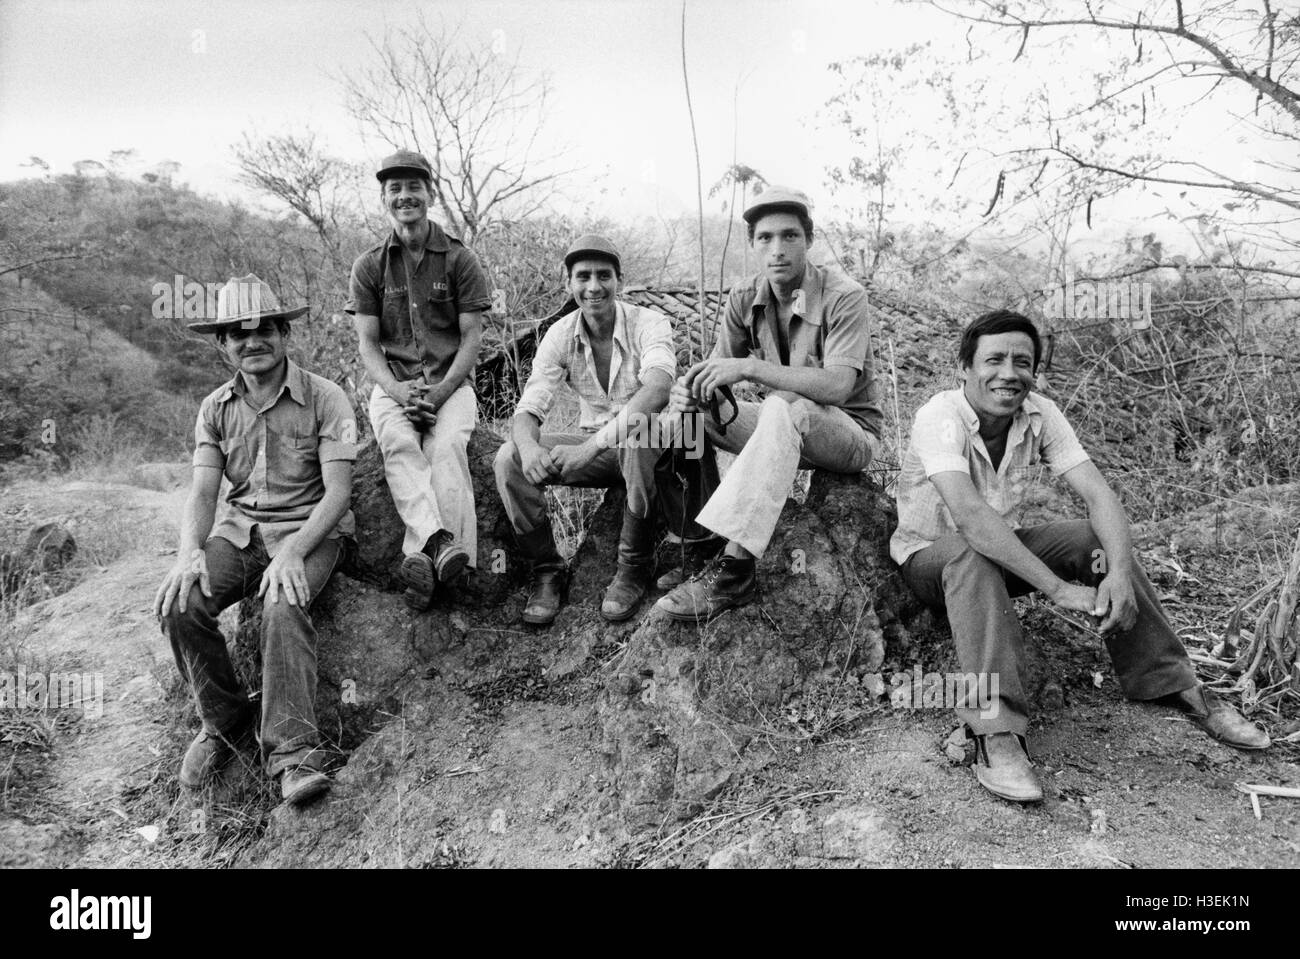 CHALATENANGO,  EL SALVADOR, FEB 1984: - Within the FPL Guerrilla's Zones of Control - the PPL (Local Popular Powers) elected to work with the adminstration of the guerrilla-held area. Stock Photo